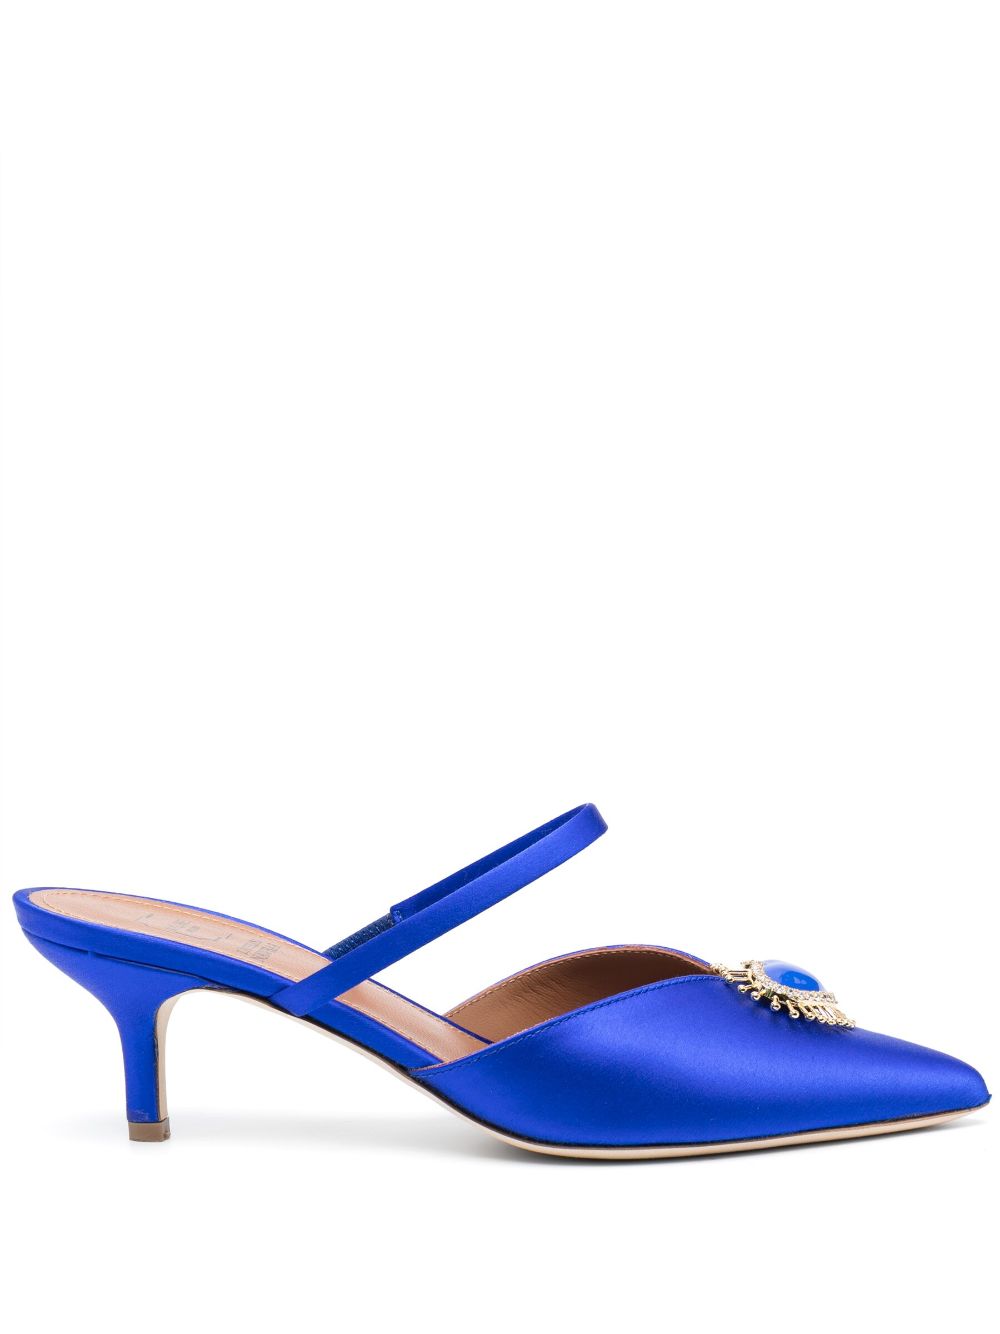 Malone Souliers Maureen 45mm mules - Blue von Malone Souliers